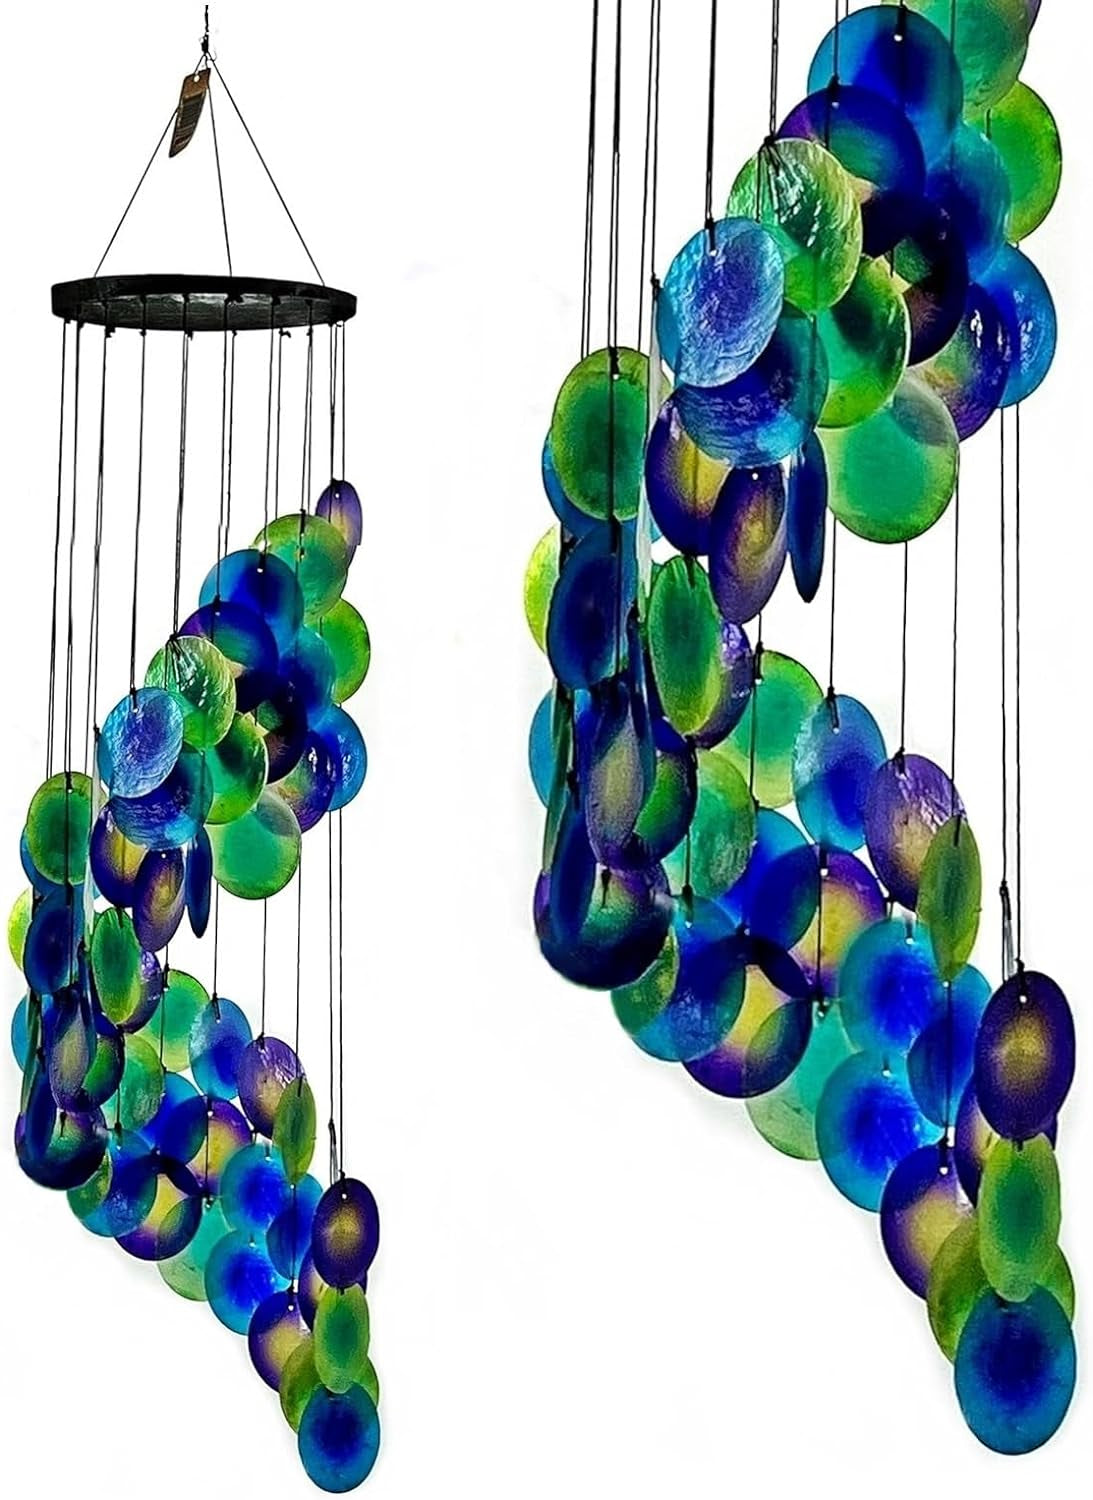 Wind Chimes Capiz Sea Glass Shells Large 27 Inch outside Windchimes Peacock Home Decor Outdoor Garden Patio Yard Lawn Unique Gifts for Mom Grandma Woman Sympathy Memorial Remembrance